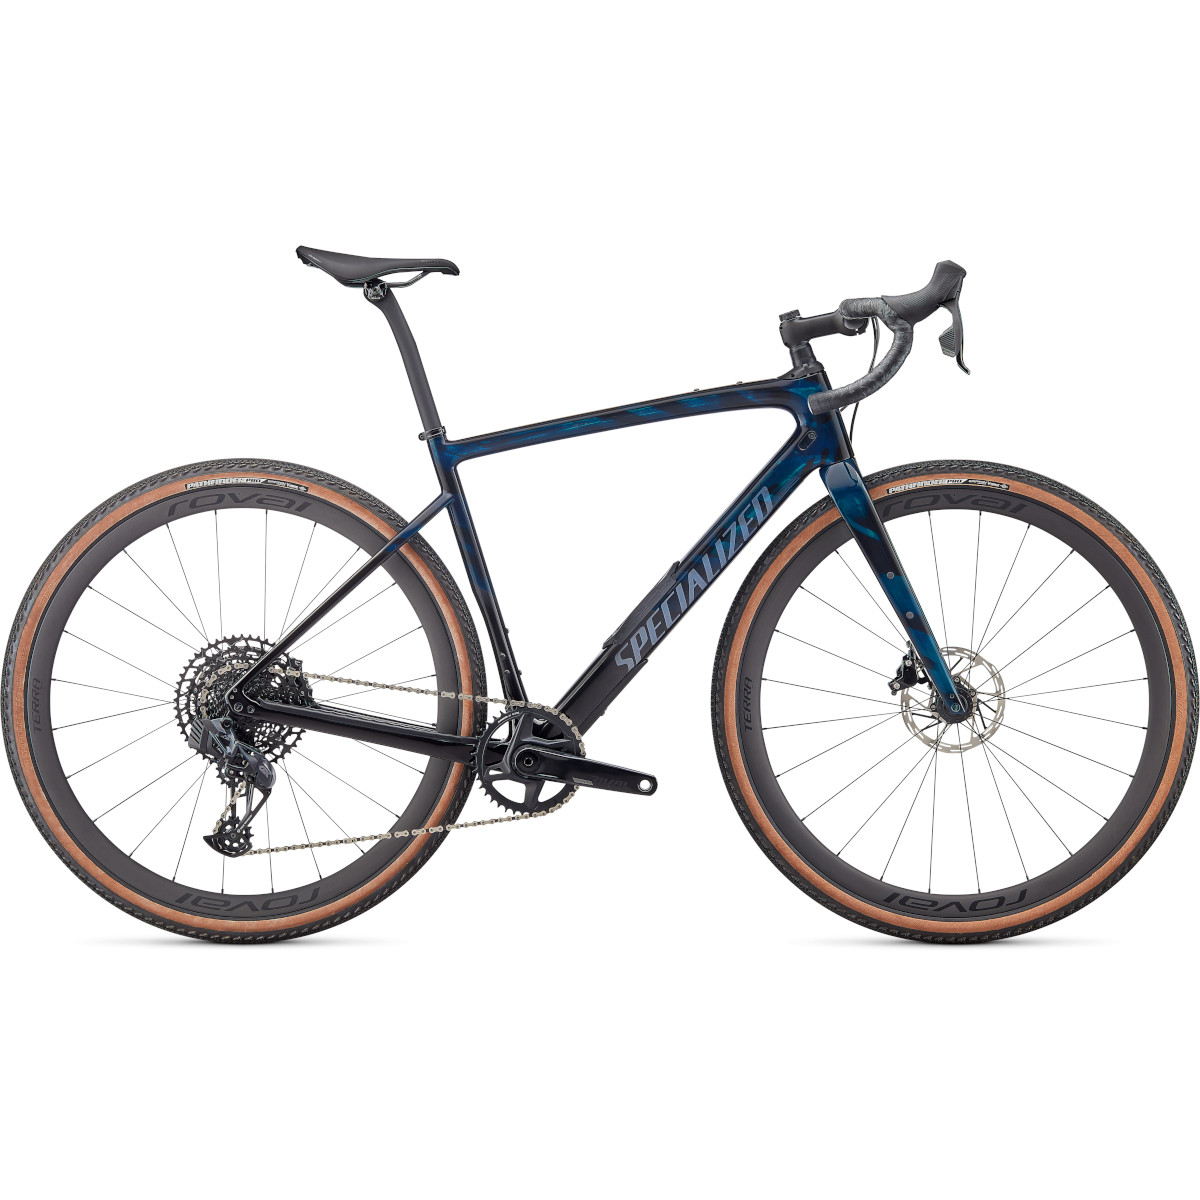 Picture of Specialized DIVERGE EXPERT - Rival eTap AXS - Gravelbike - Carbon -2022 - gloss teal / limestone/ wild